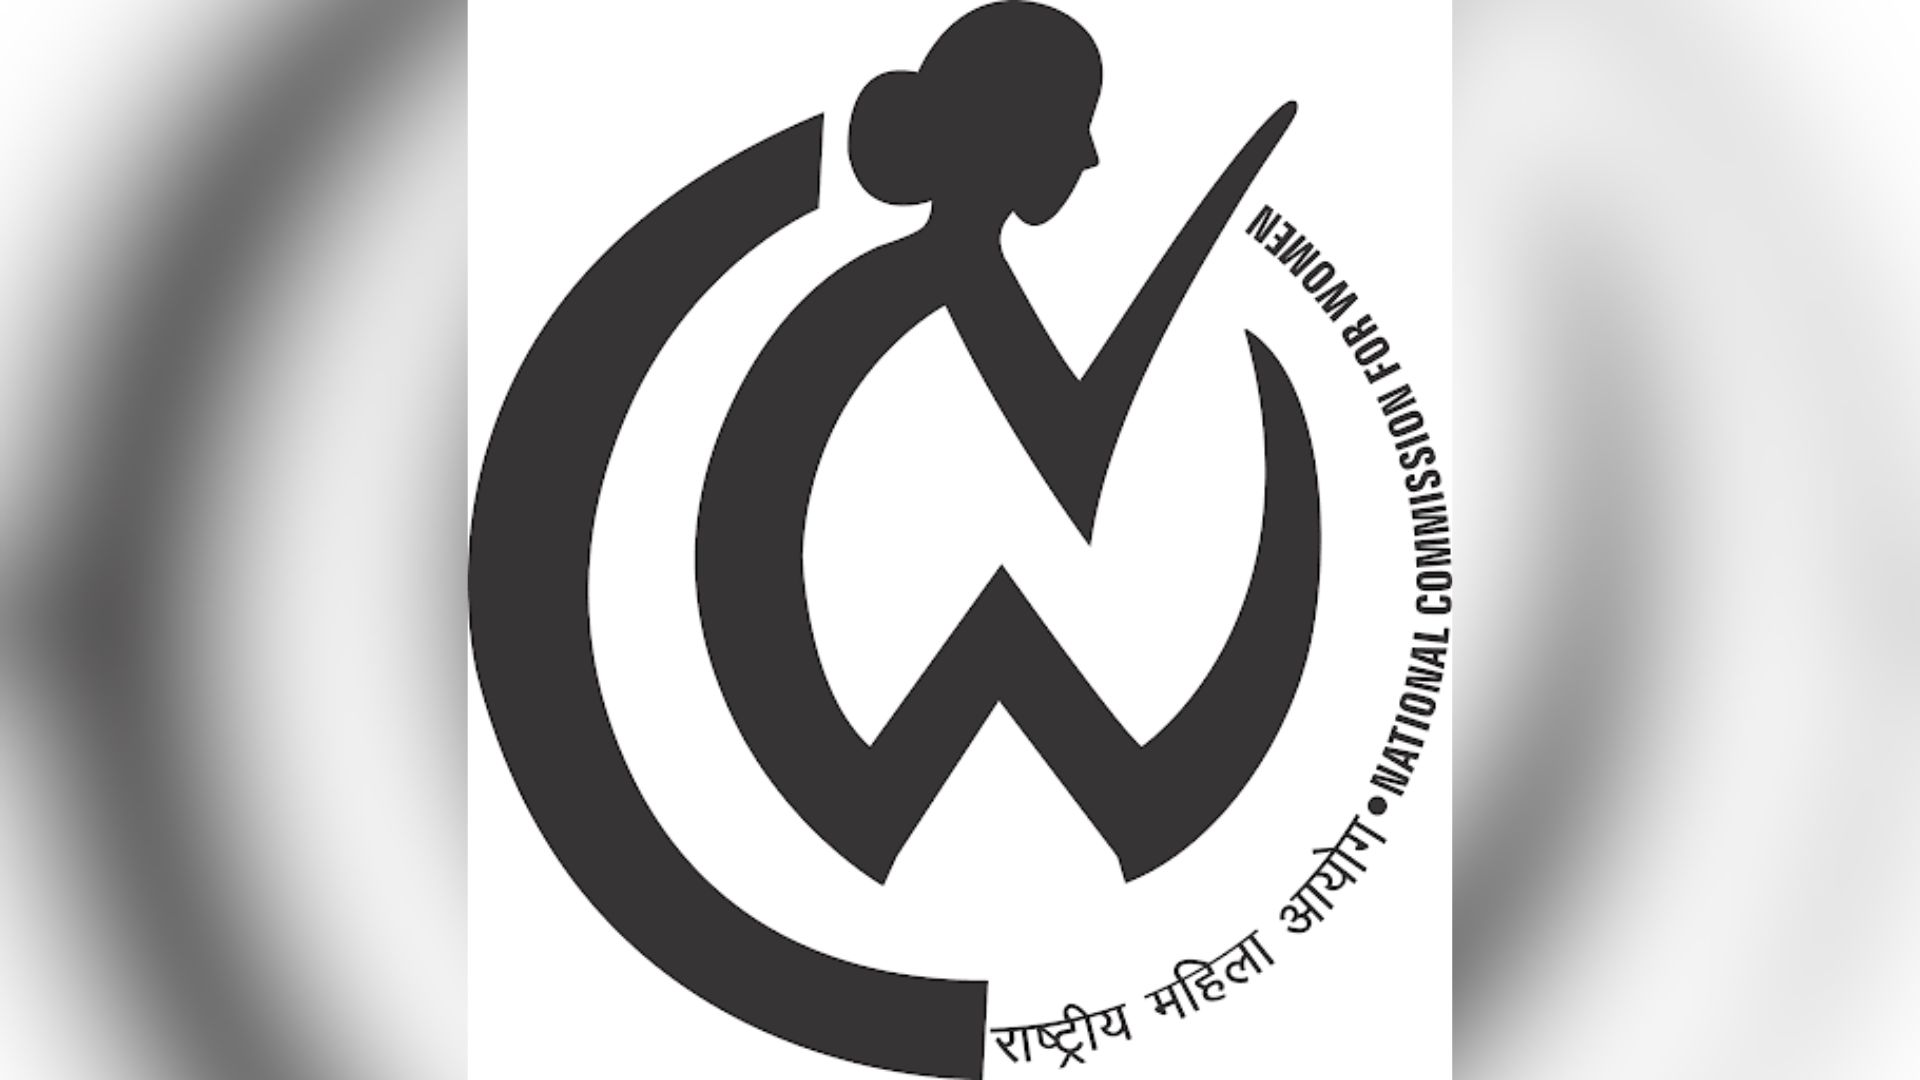 NCW (National Commission for Women)